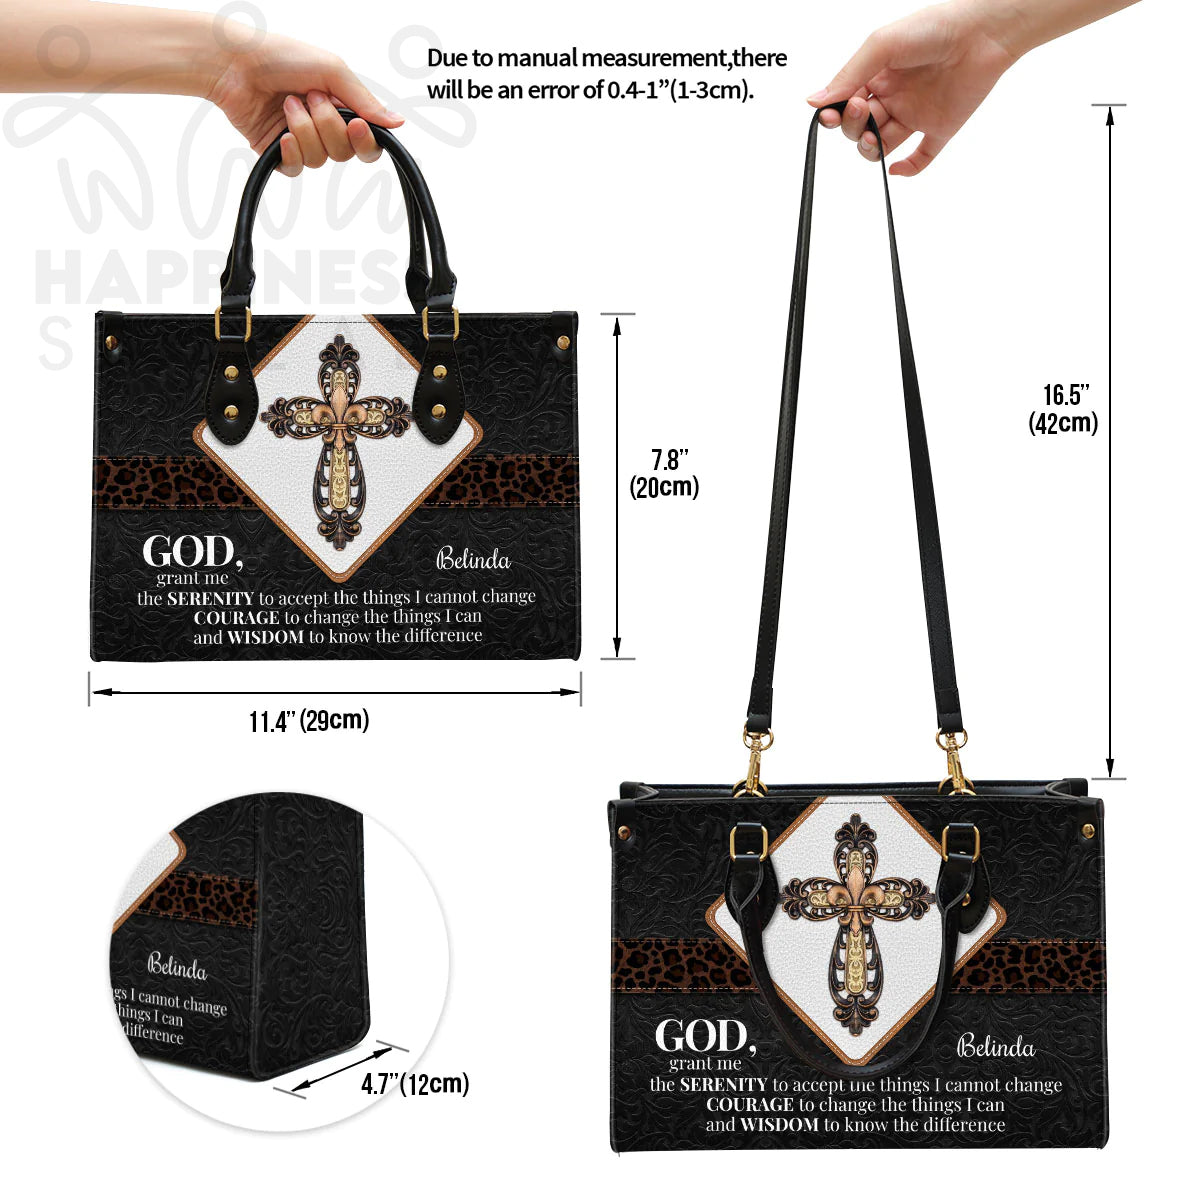 Christianart Handbag, Personalized Hand Bag, God and Cross, Personalized Gifts, Gifts for Women. Leather Tote Bag